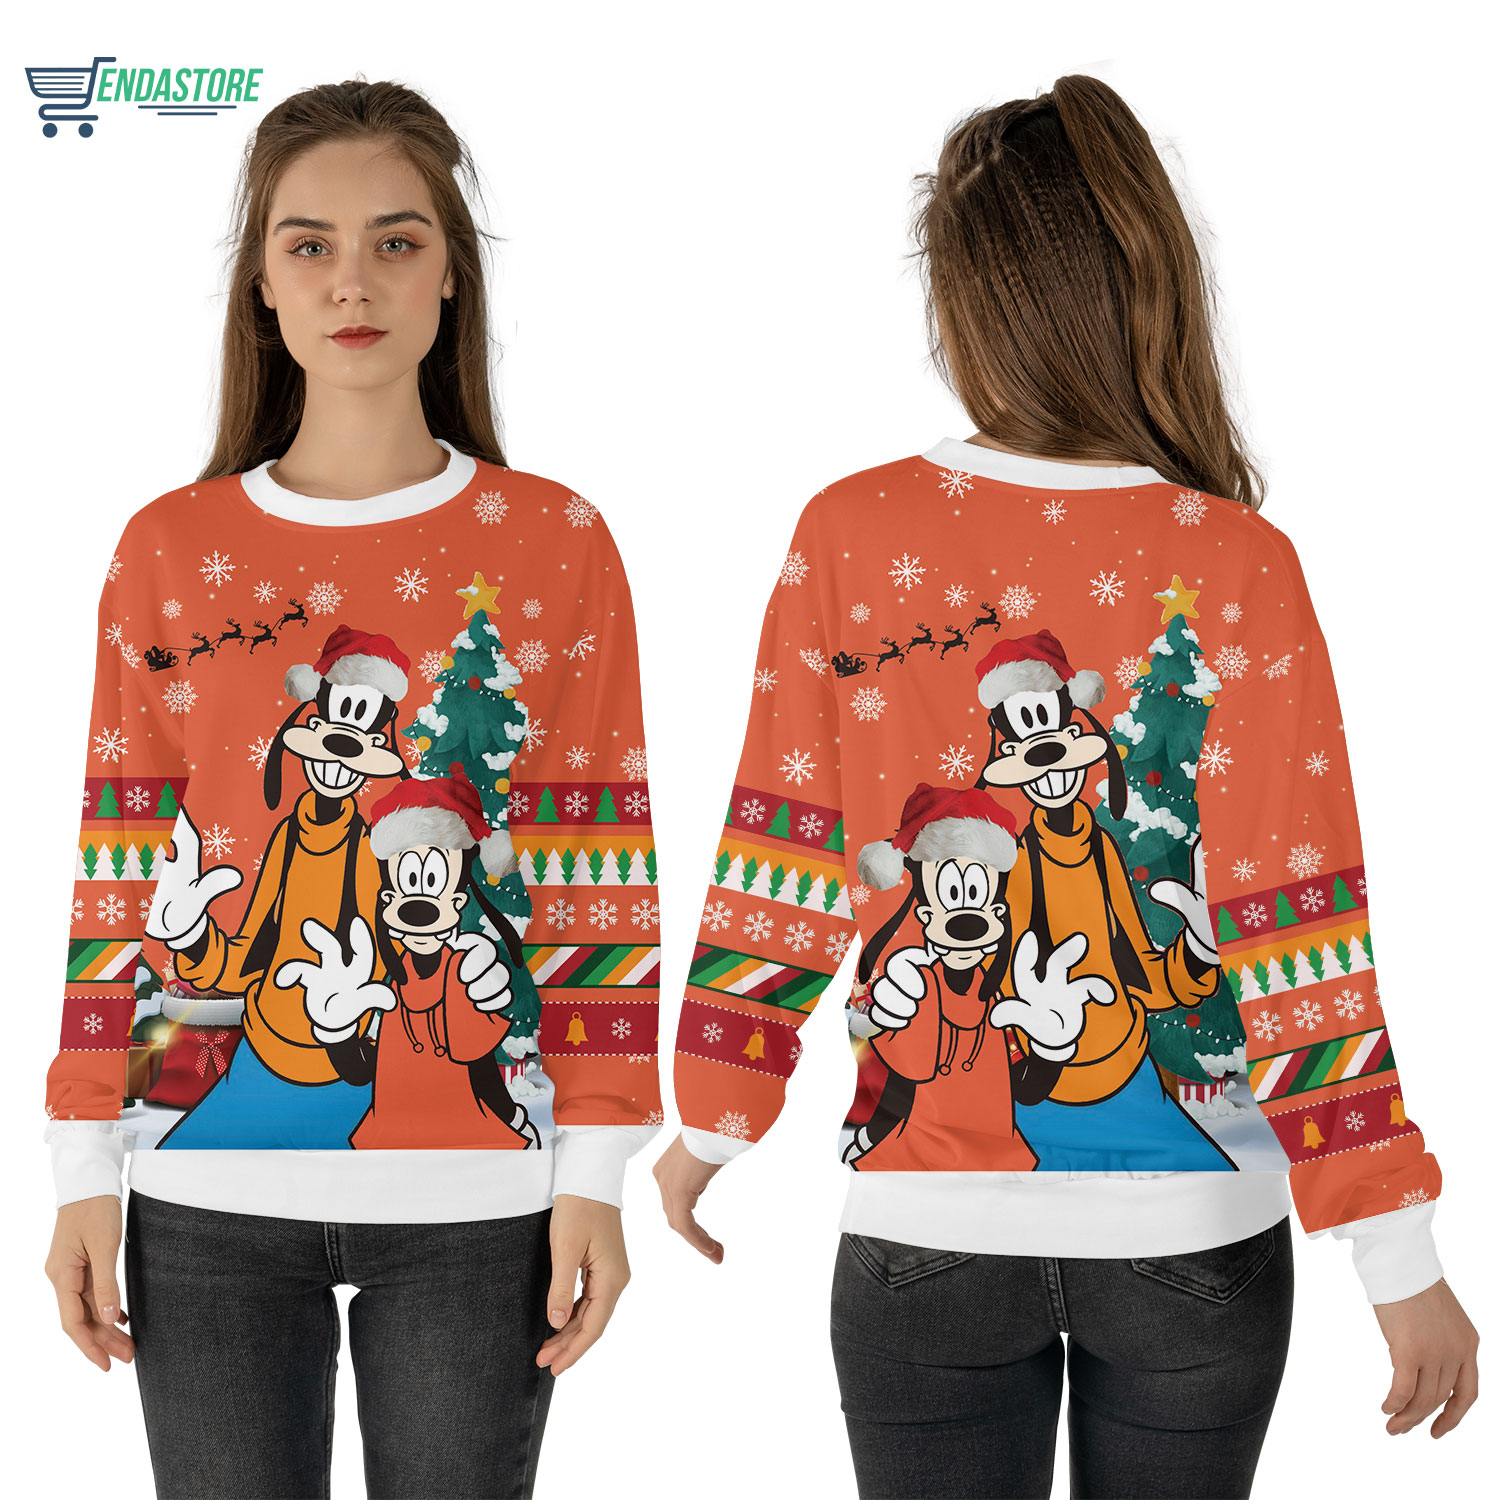 Max and Goofy Christmas sweater - Endastore.com